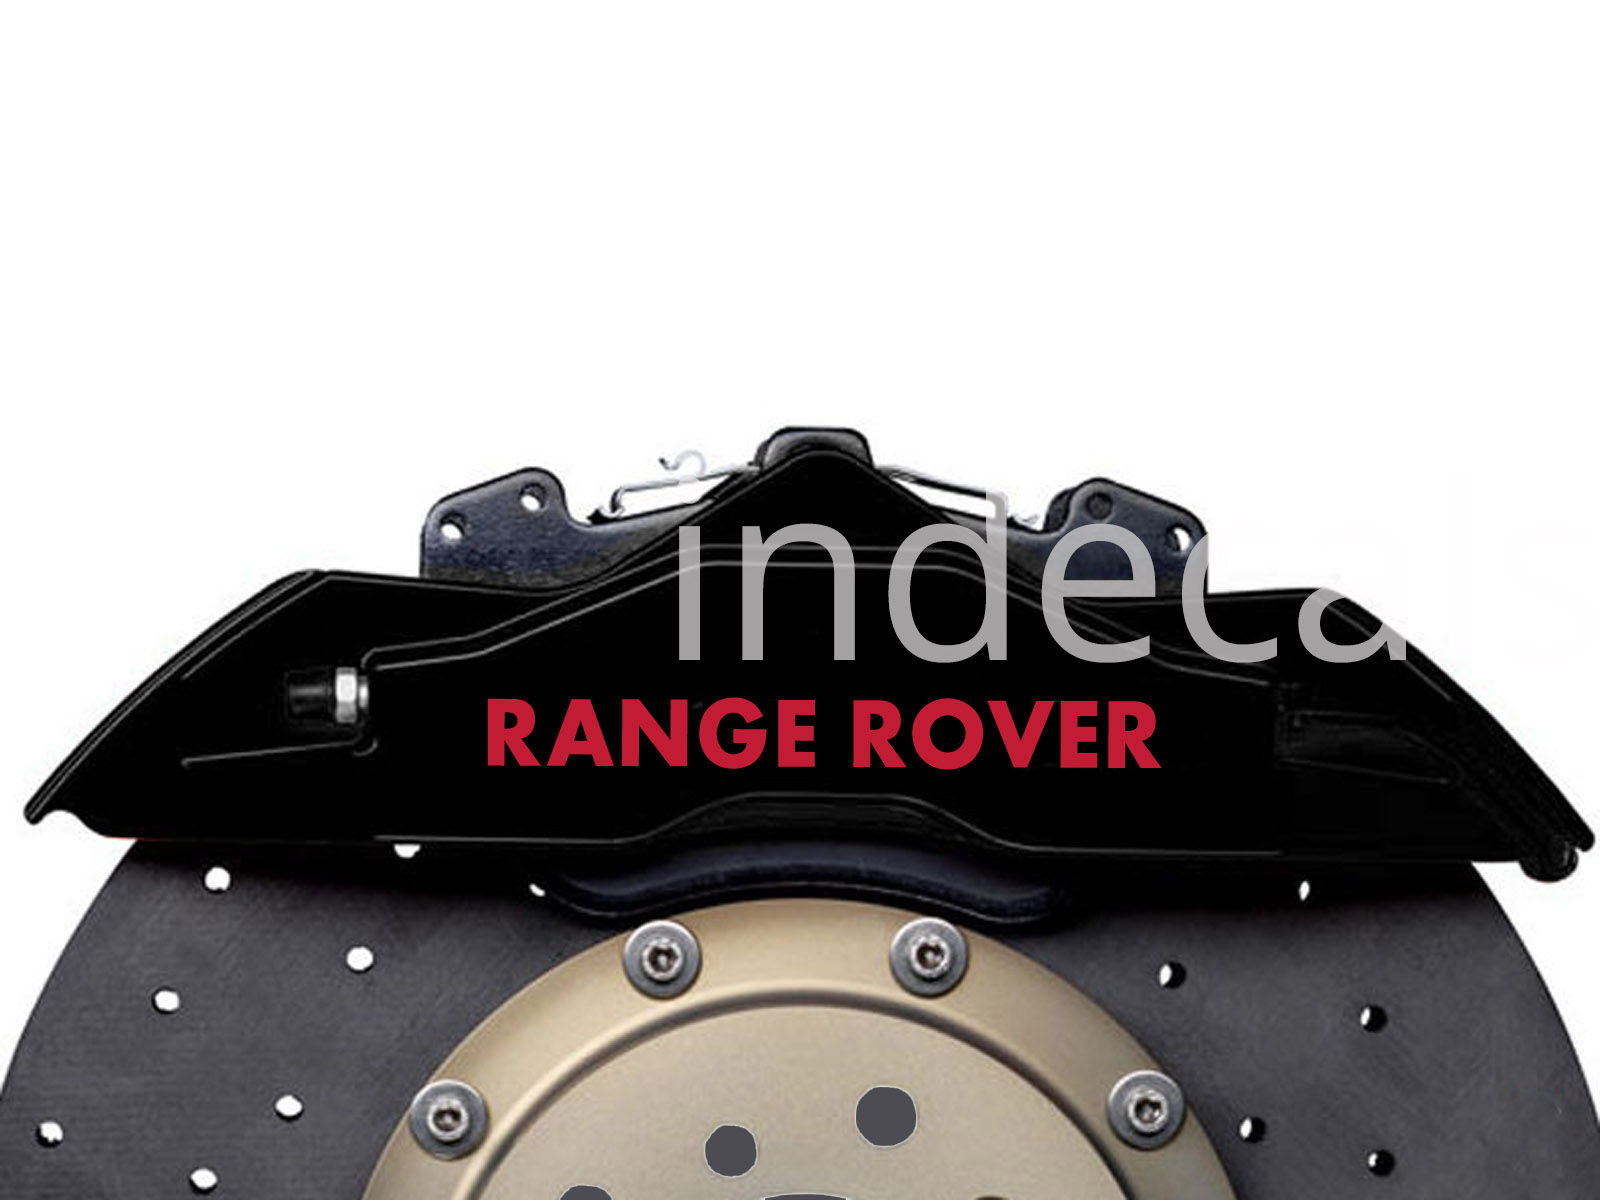 6 x Range Rover Stickers for Brakes - Red